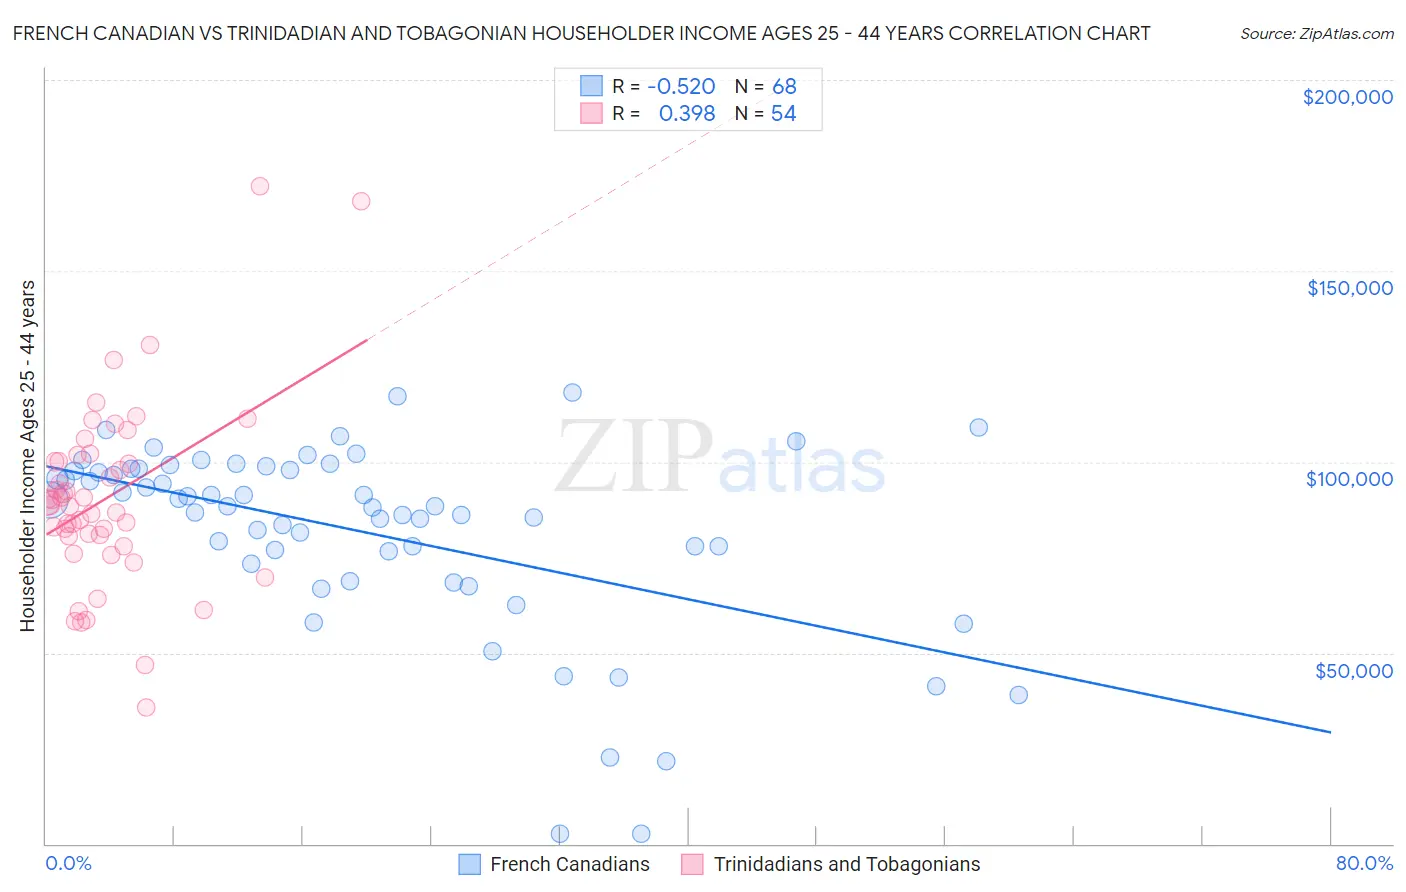 French Canadian vs Trinidadian and Tobagonian Householder Income Ages 25 - 44 years